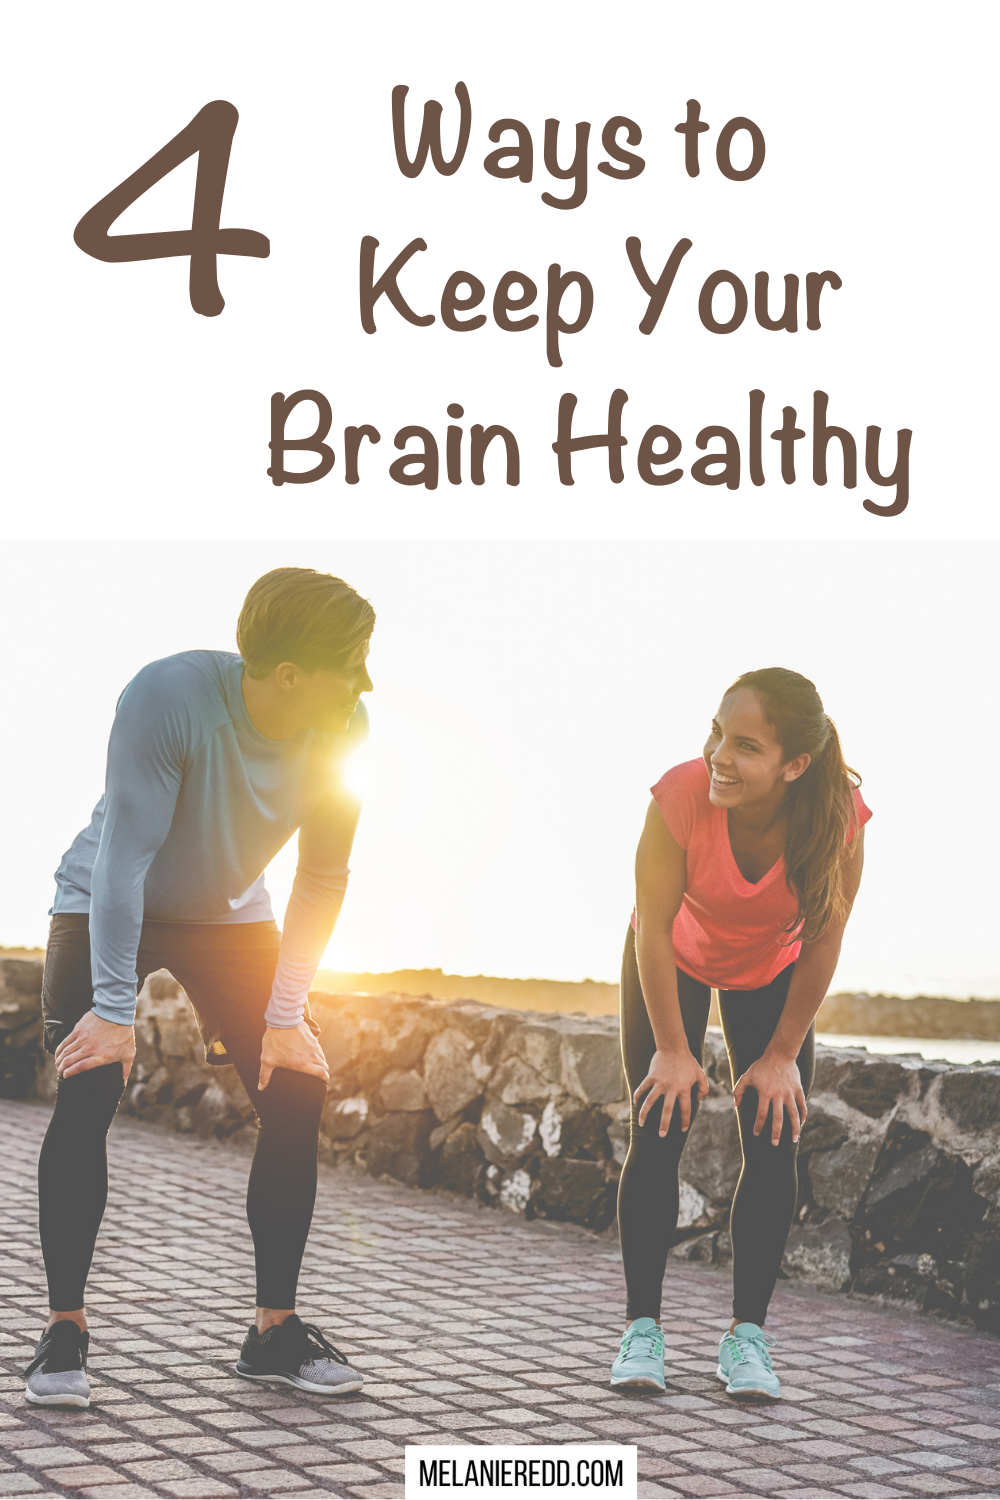 Are there some things we can do to improve our mental health, memories, and focus? Here are 4 ways to keep your brain healthy.